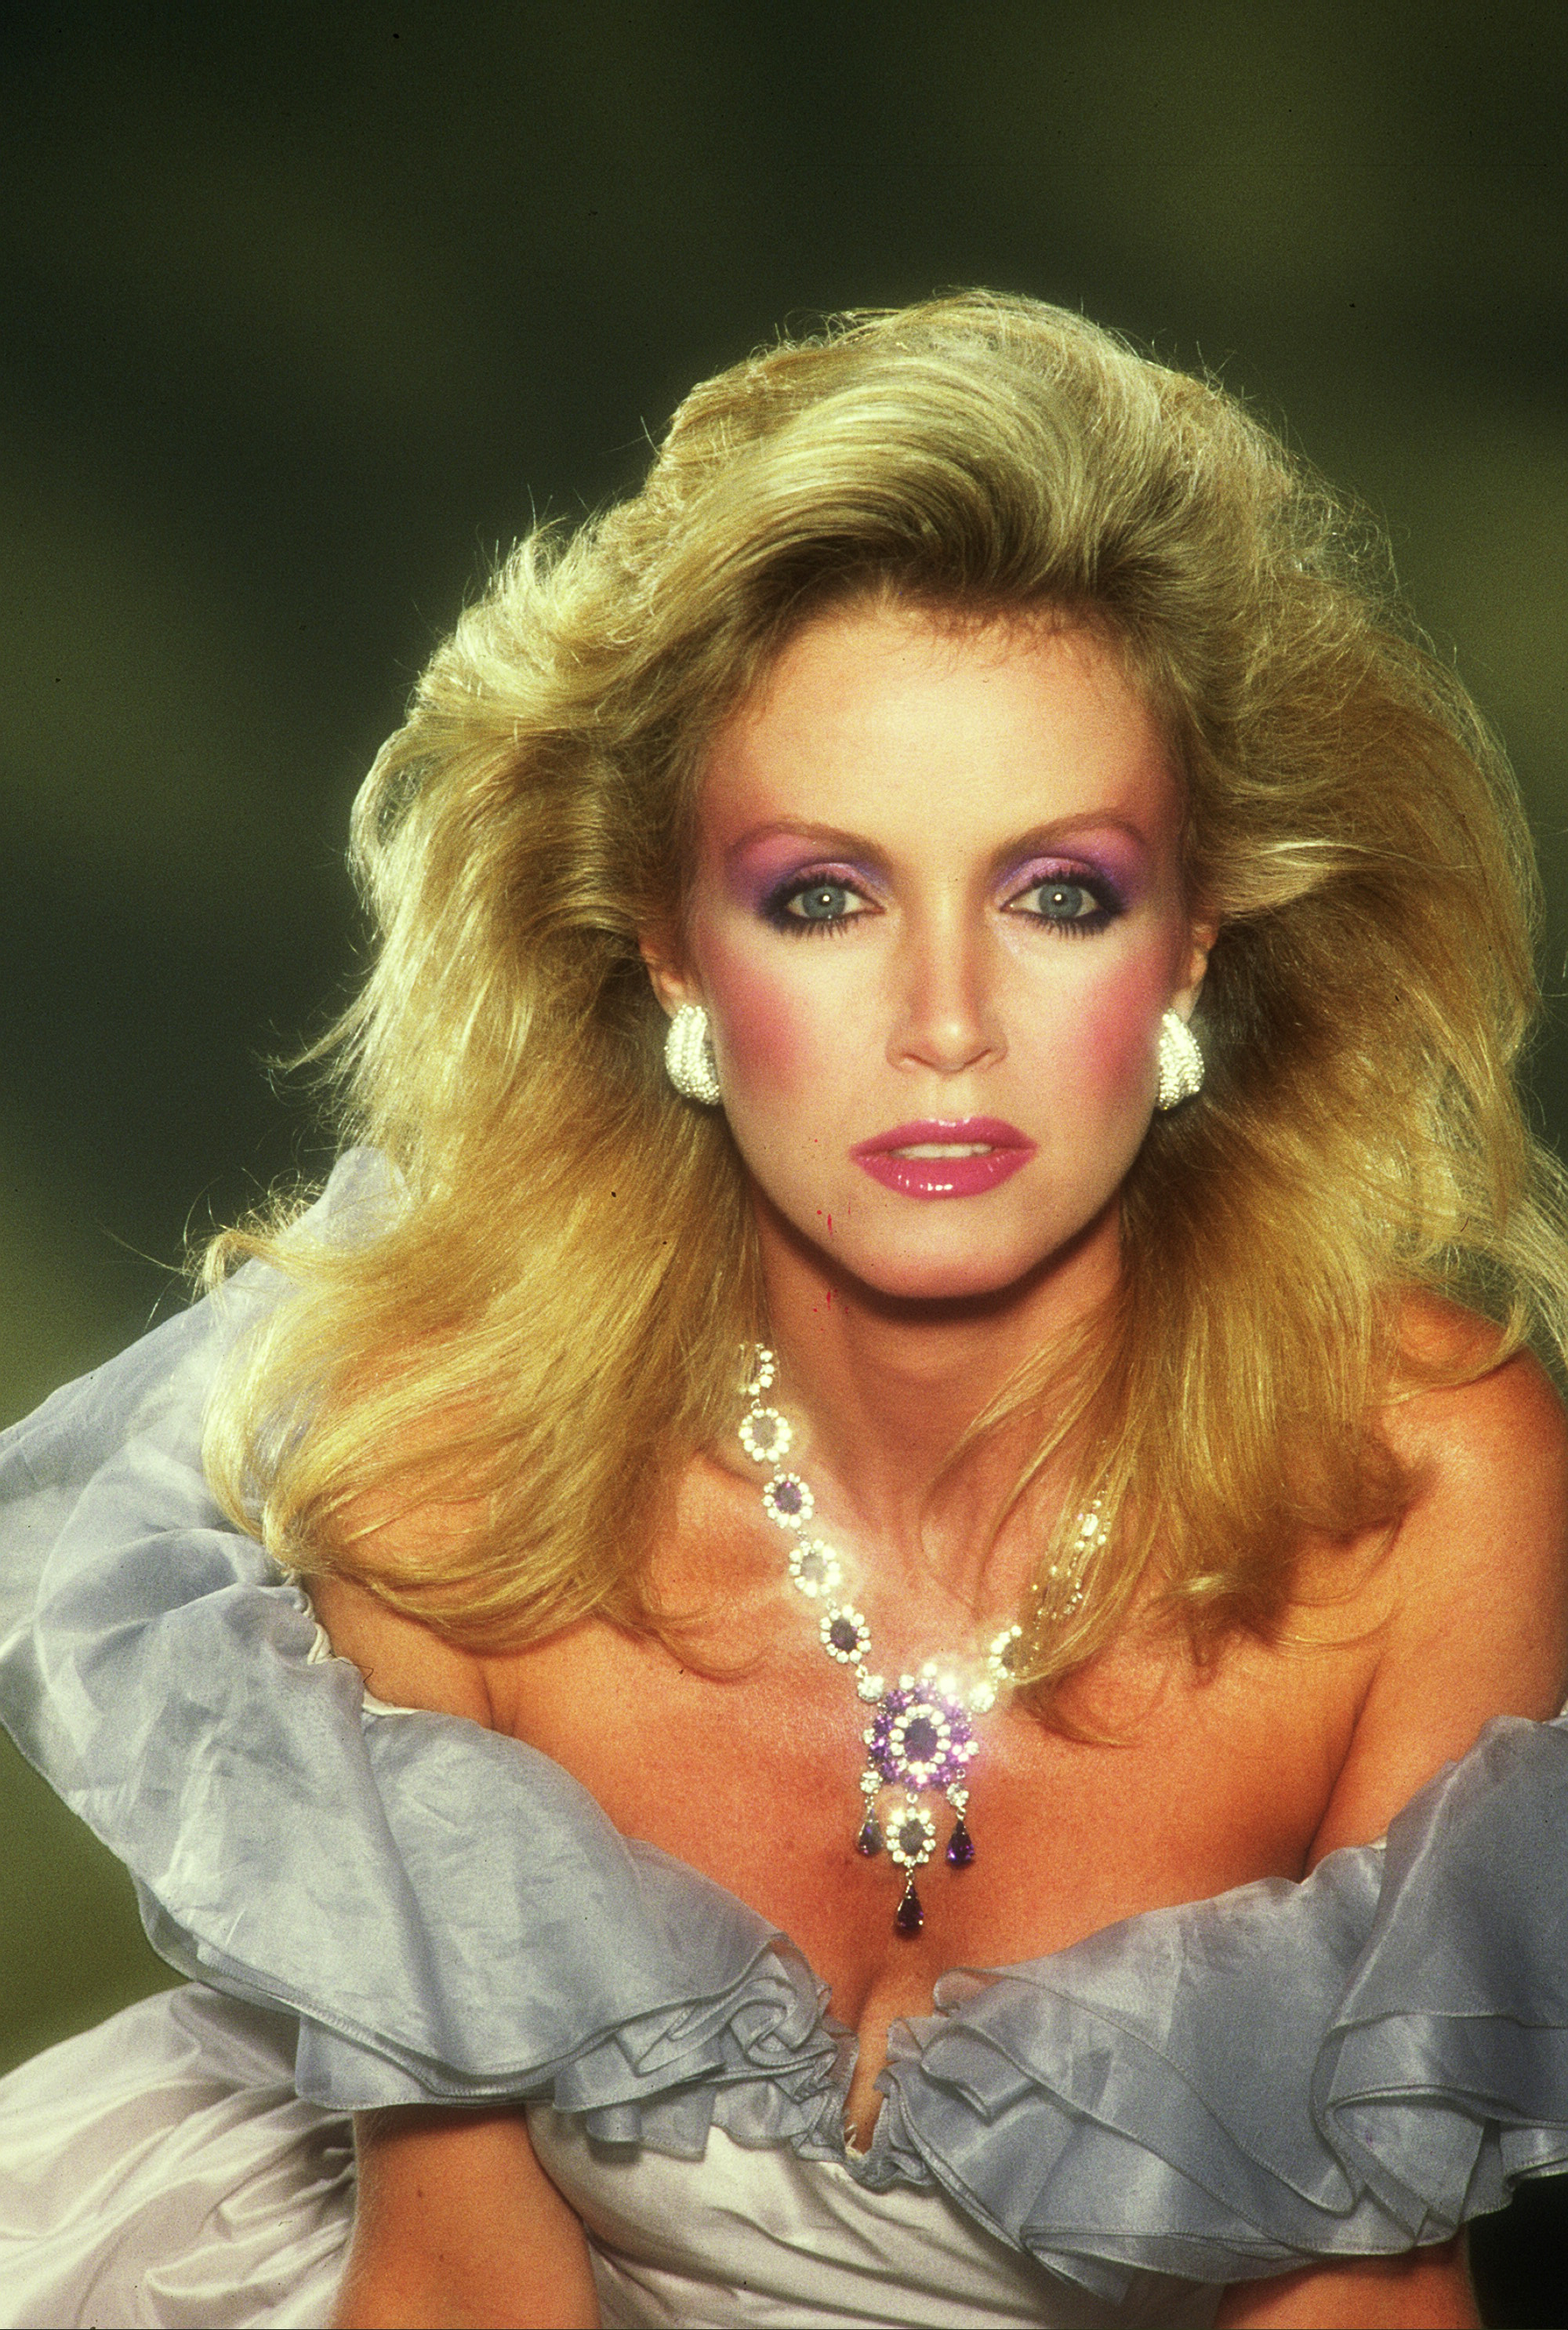 Donna mills photos found on the web.